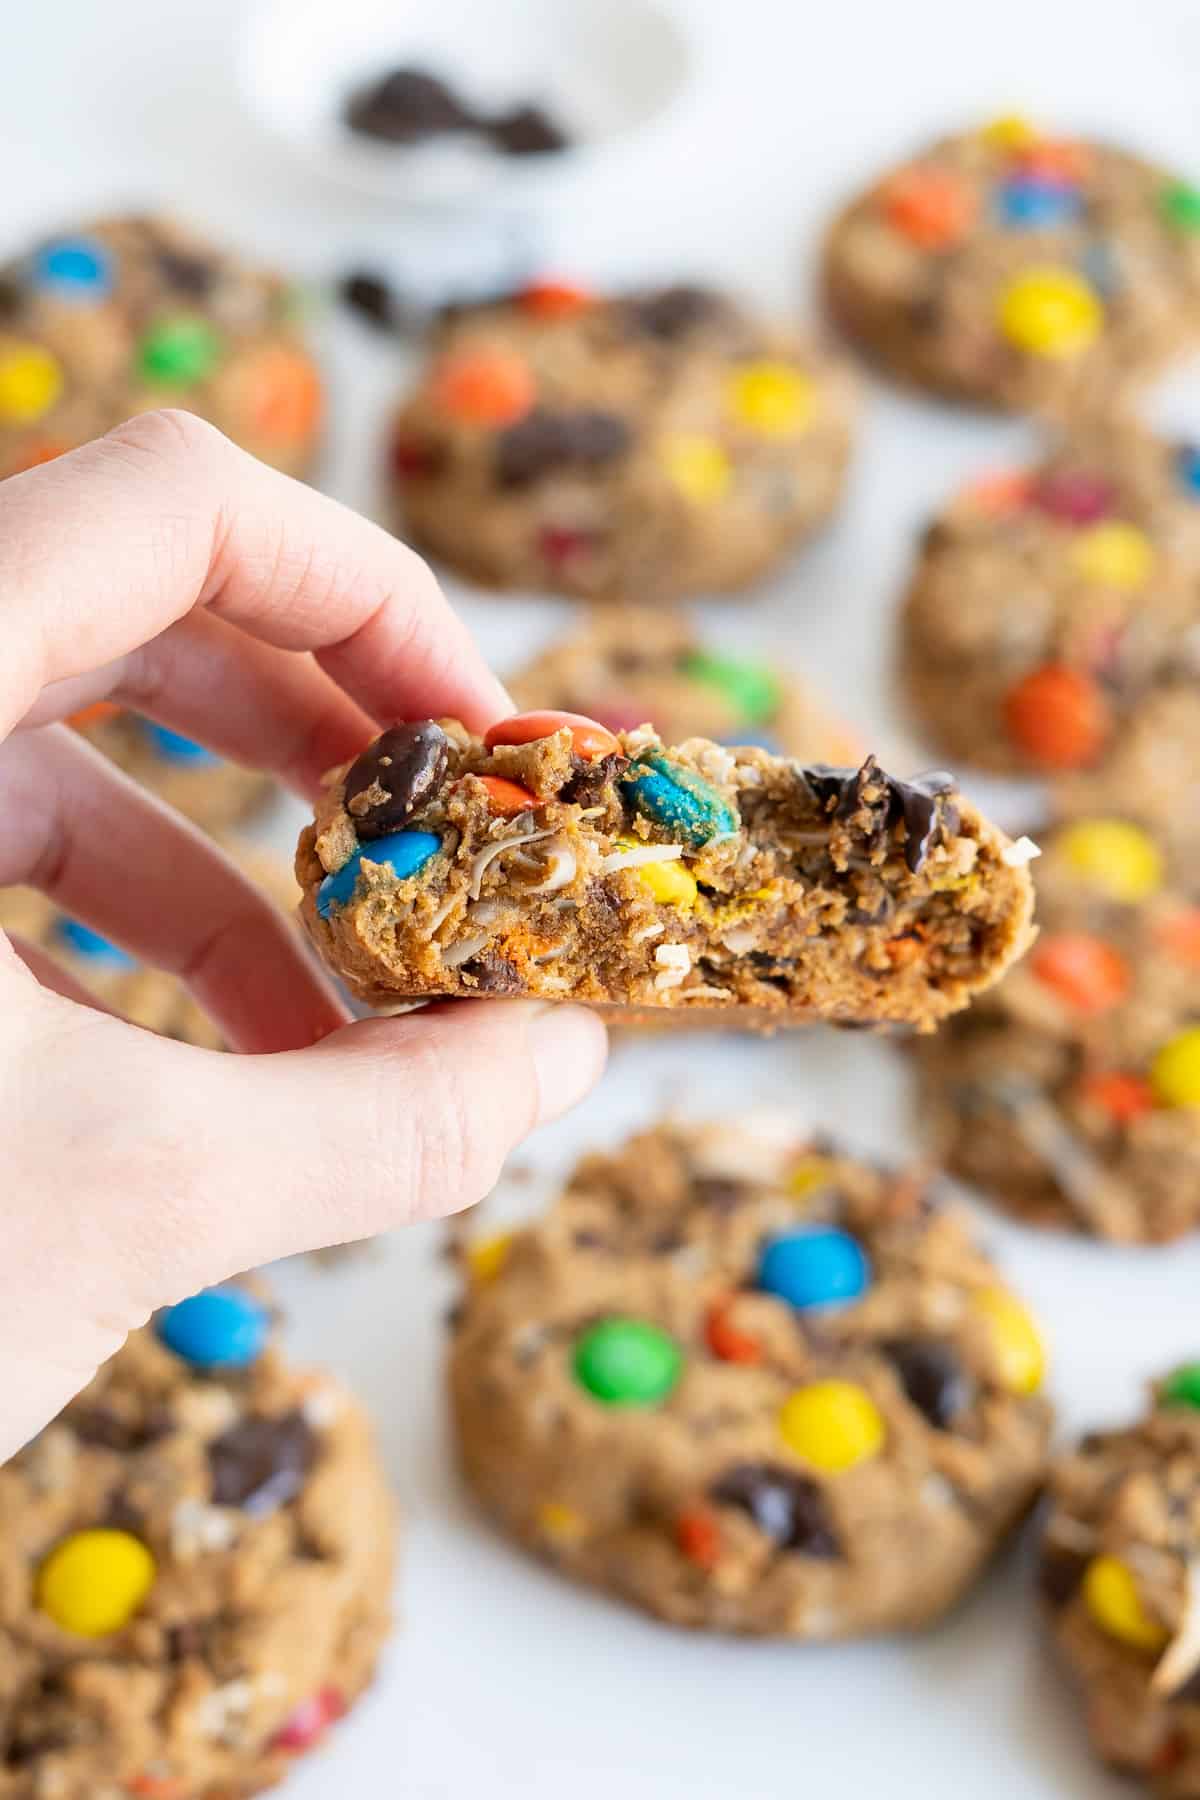 A hand holding half of a gluten-free monster cookie to show the chewy texture with M&M's, shredded coconut, and chocolate chips.